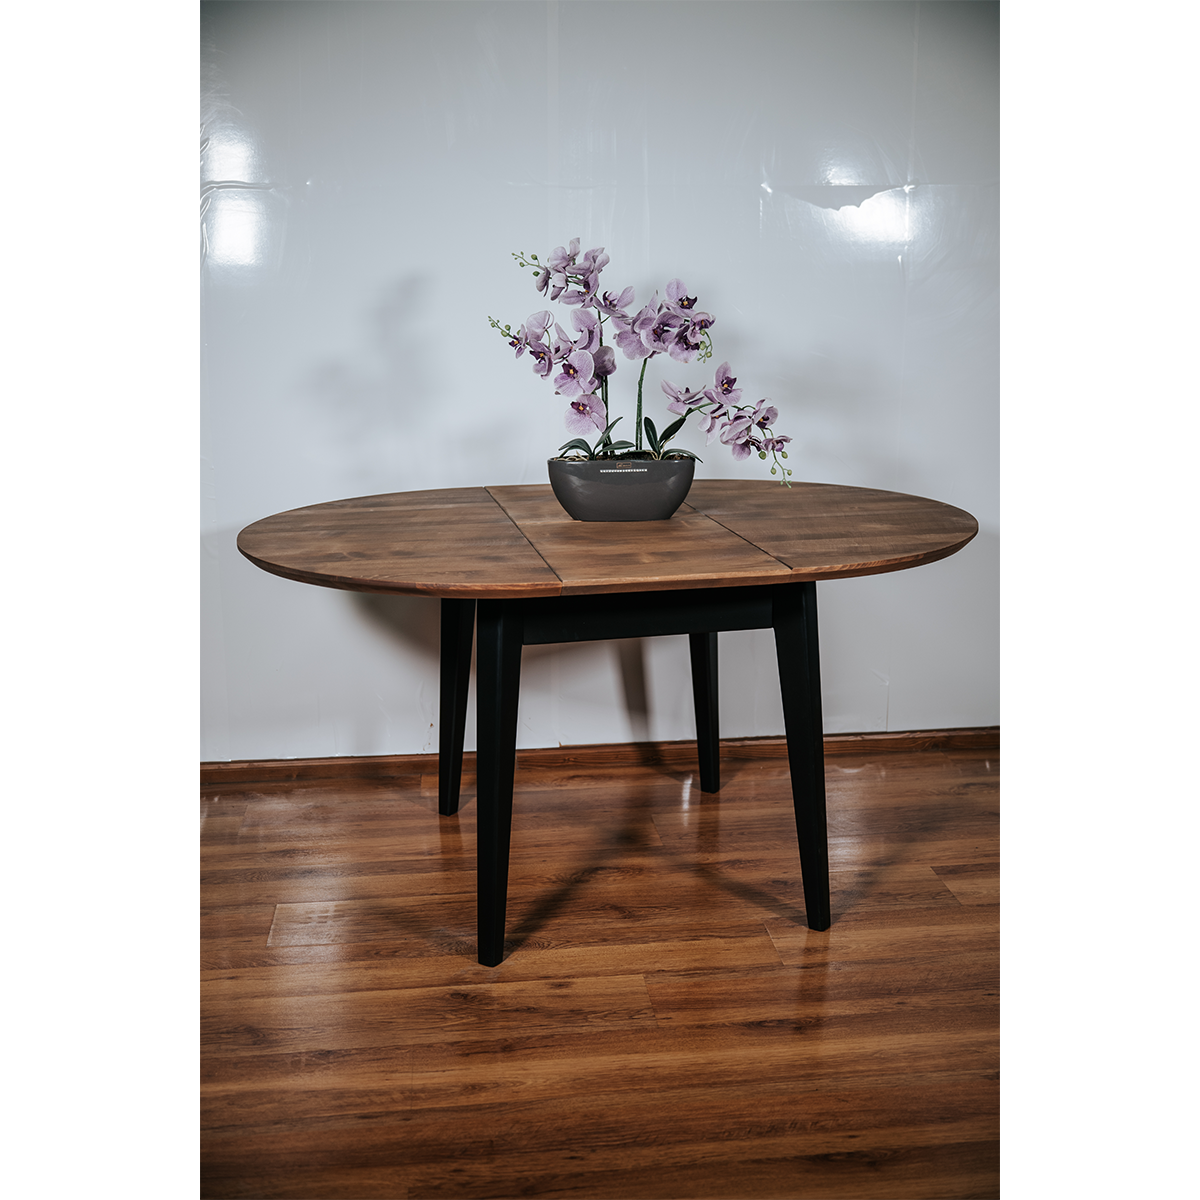 Table ronde extensible Giove - L'Ameublier